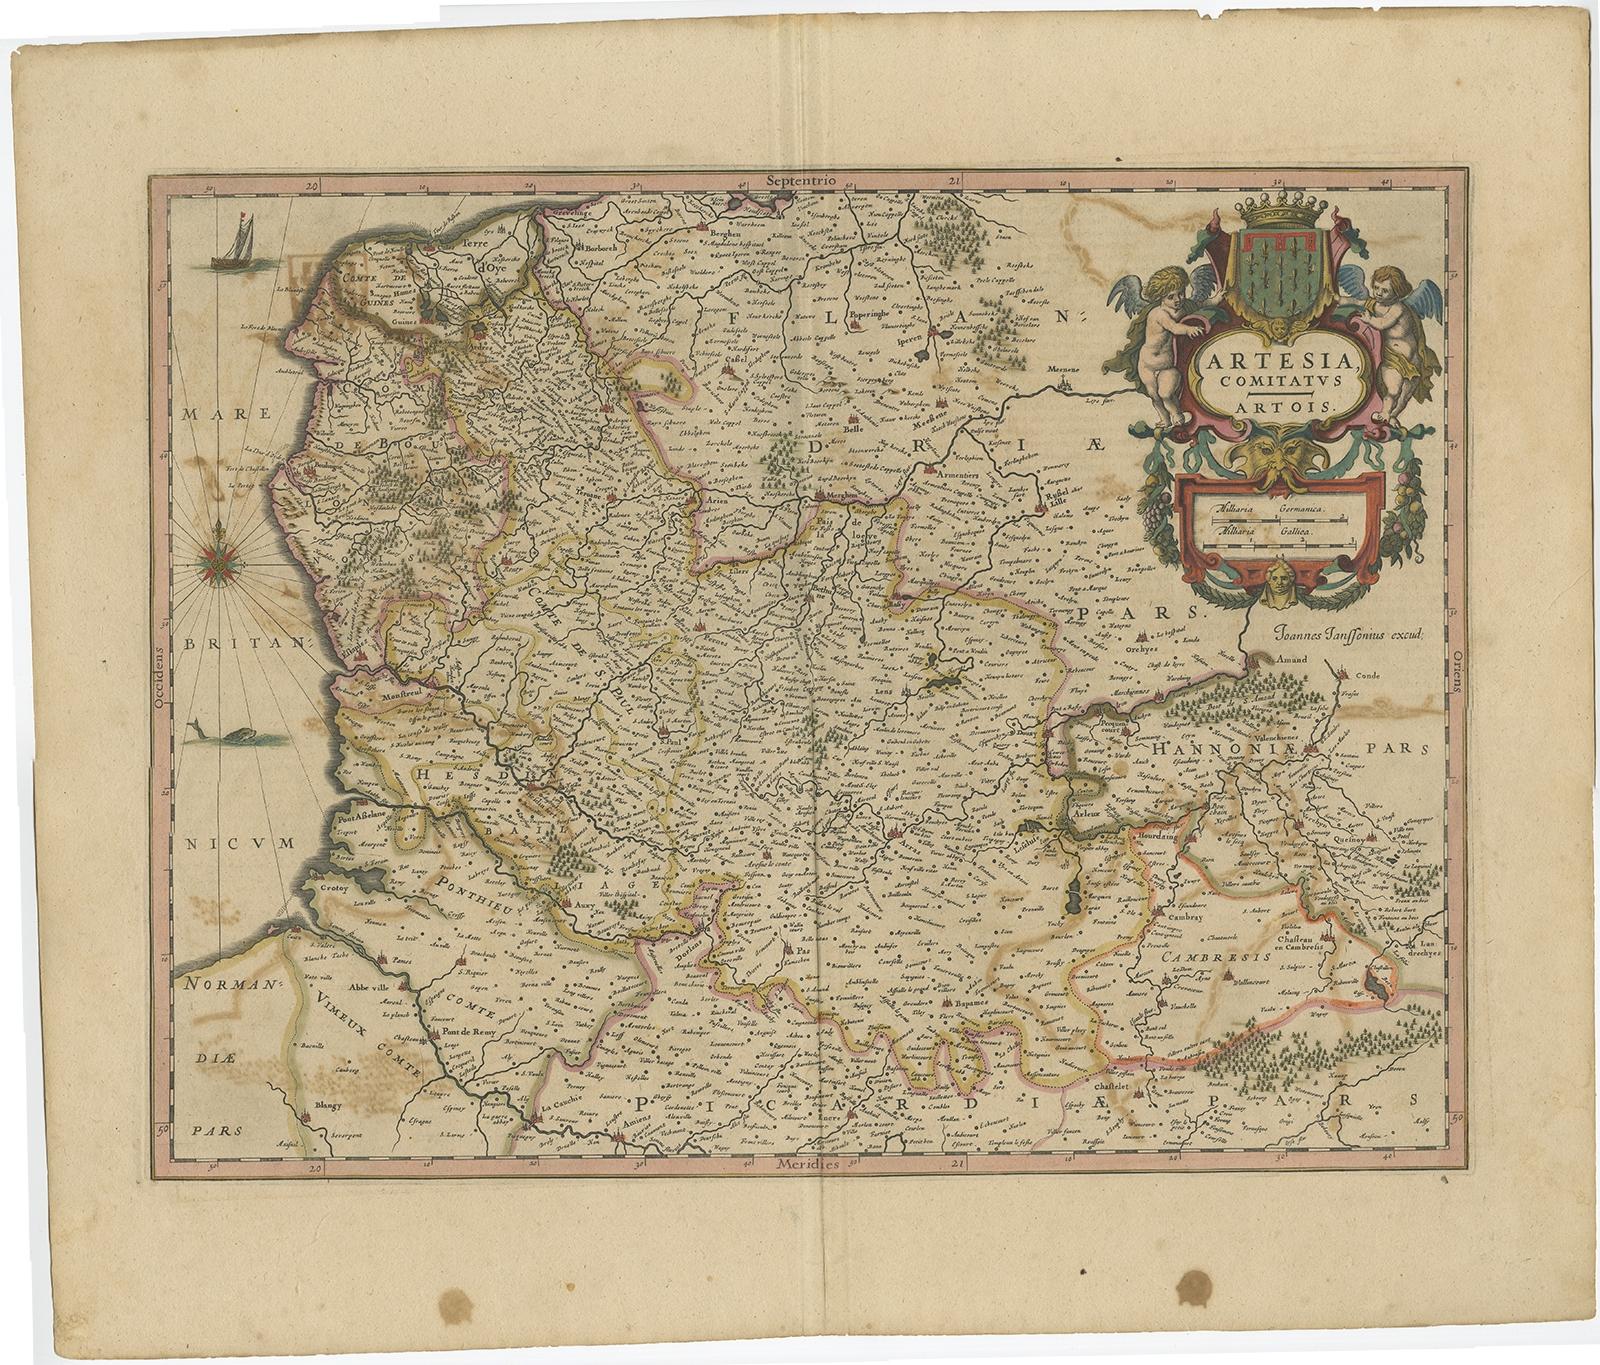 Antique map titled 'Artesia Comitatus Artois'. 

Map of Artois or Artesia, France. Artois is former province located in the northwestern part of France, boarding Belgium (Flanders) on the north and Picardy to the south.

Artists and Engravers: